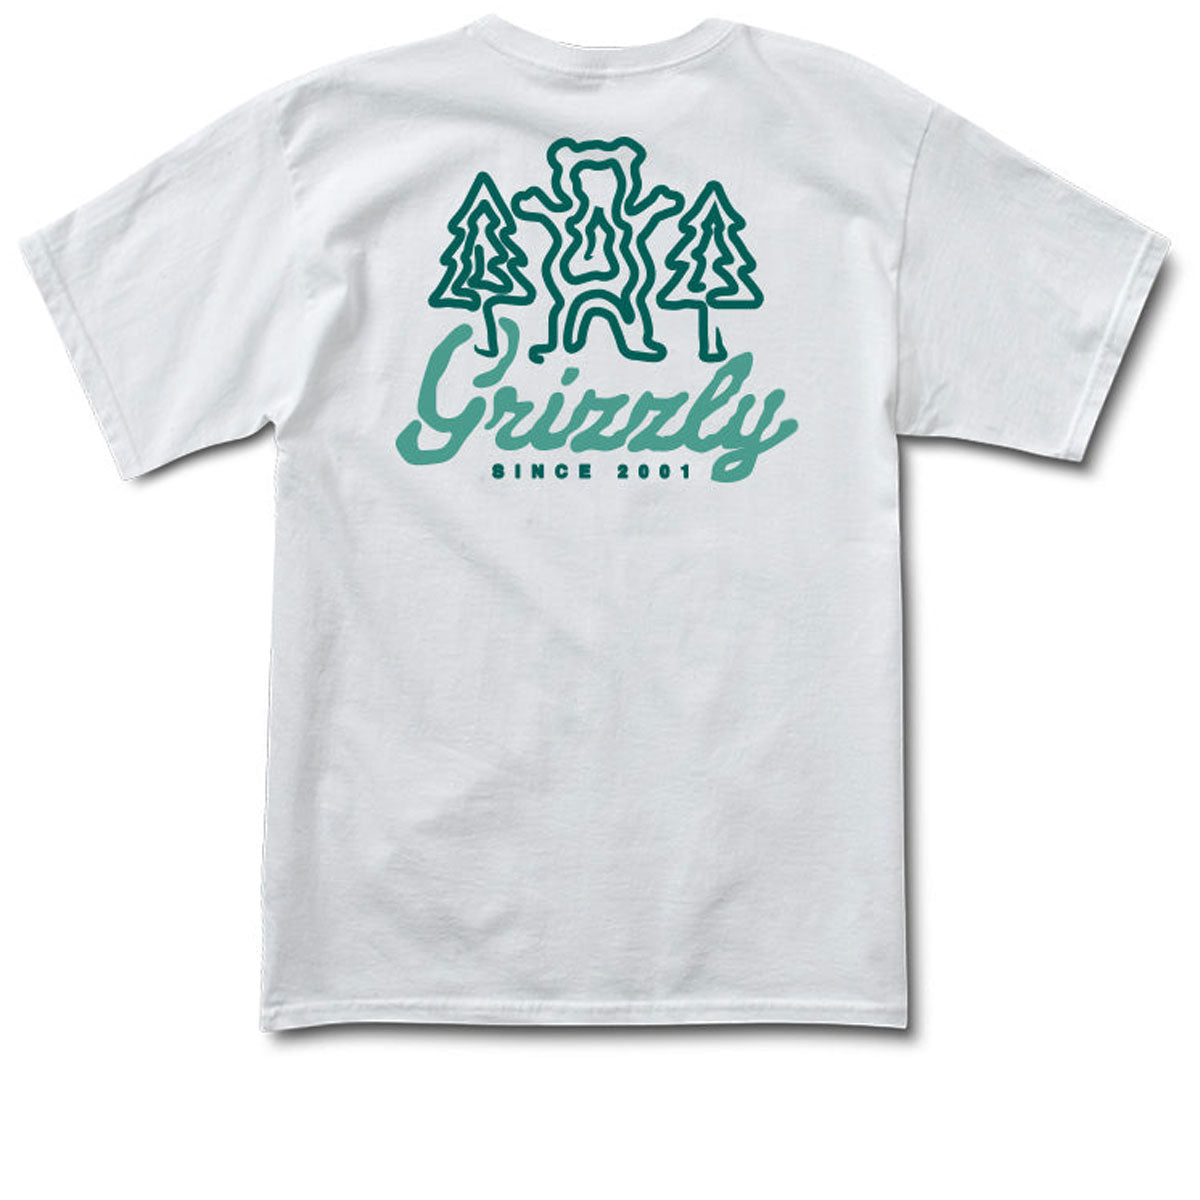 Grizzly Windy Creek T-Shirt - White image 1